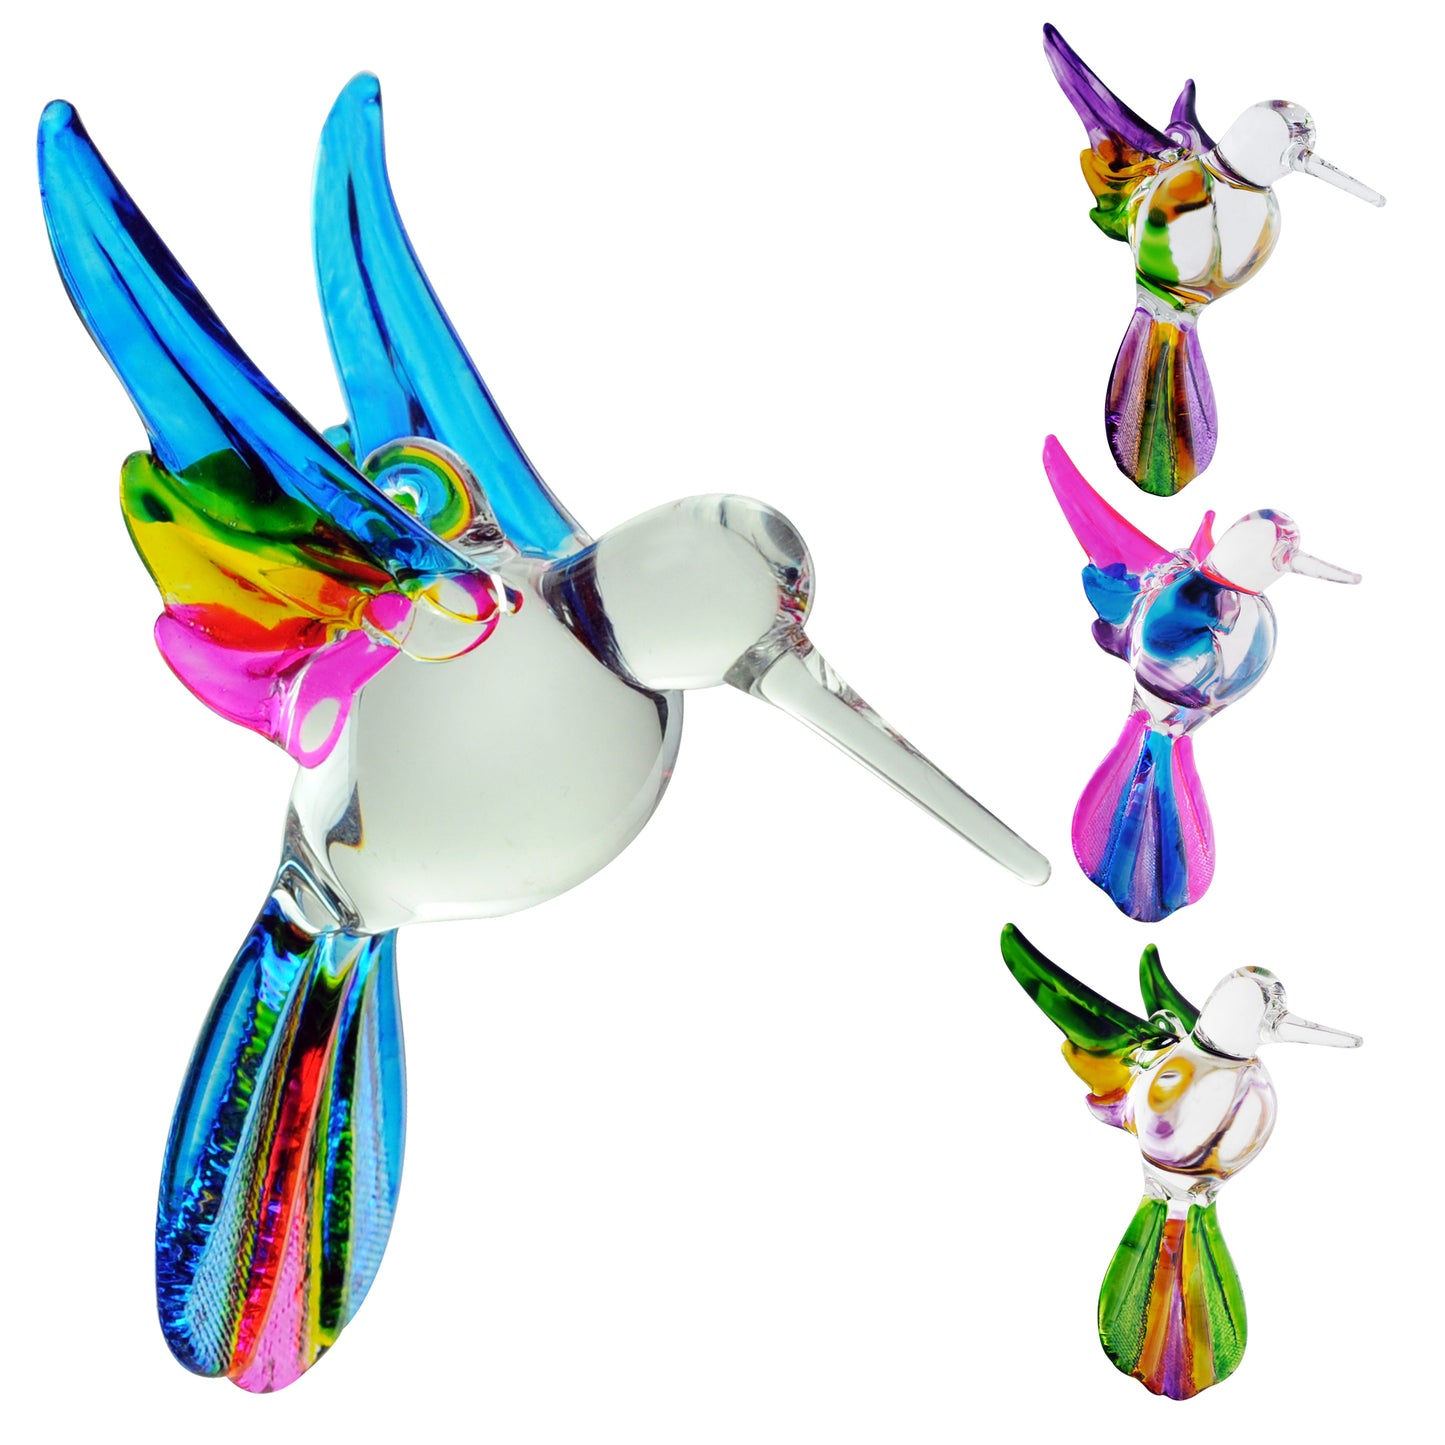 Crystal Castle Glass Multi-Colored Hummingbird ornaments in all 4 color variations. 